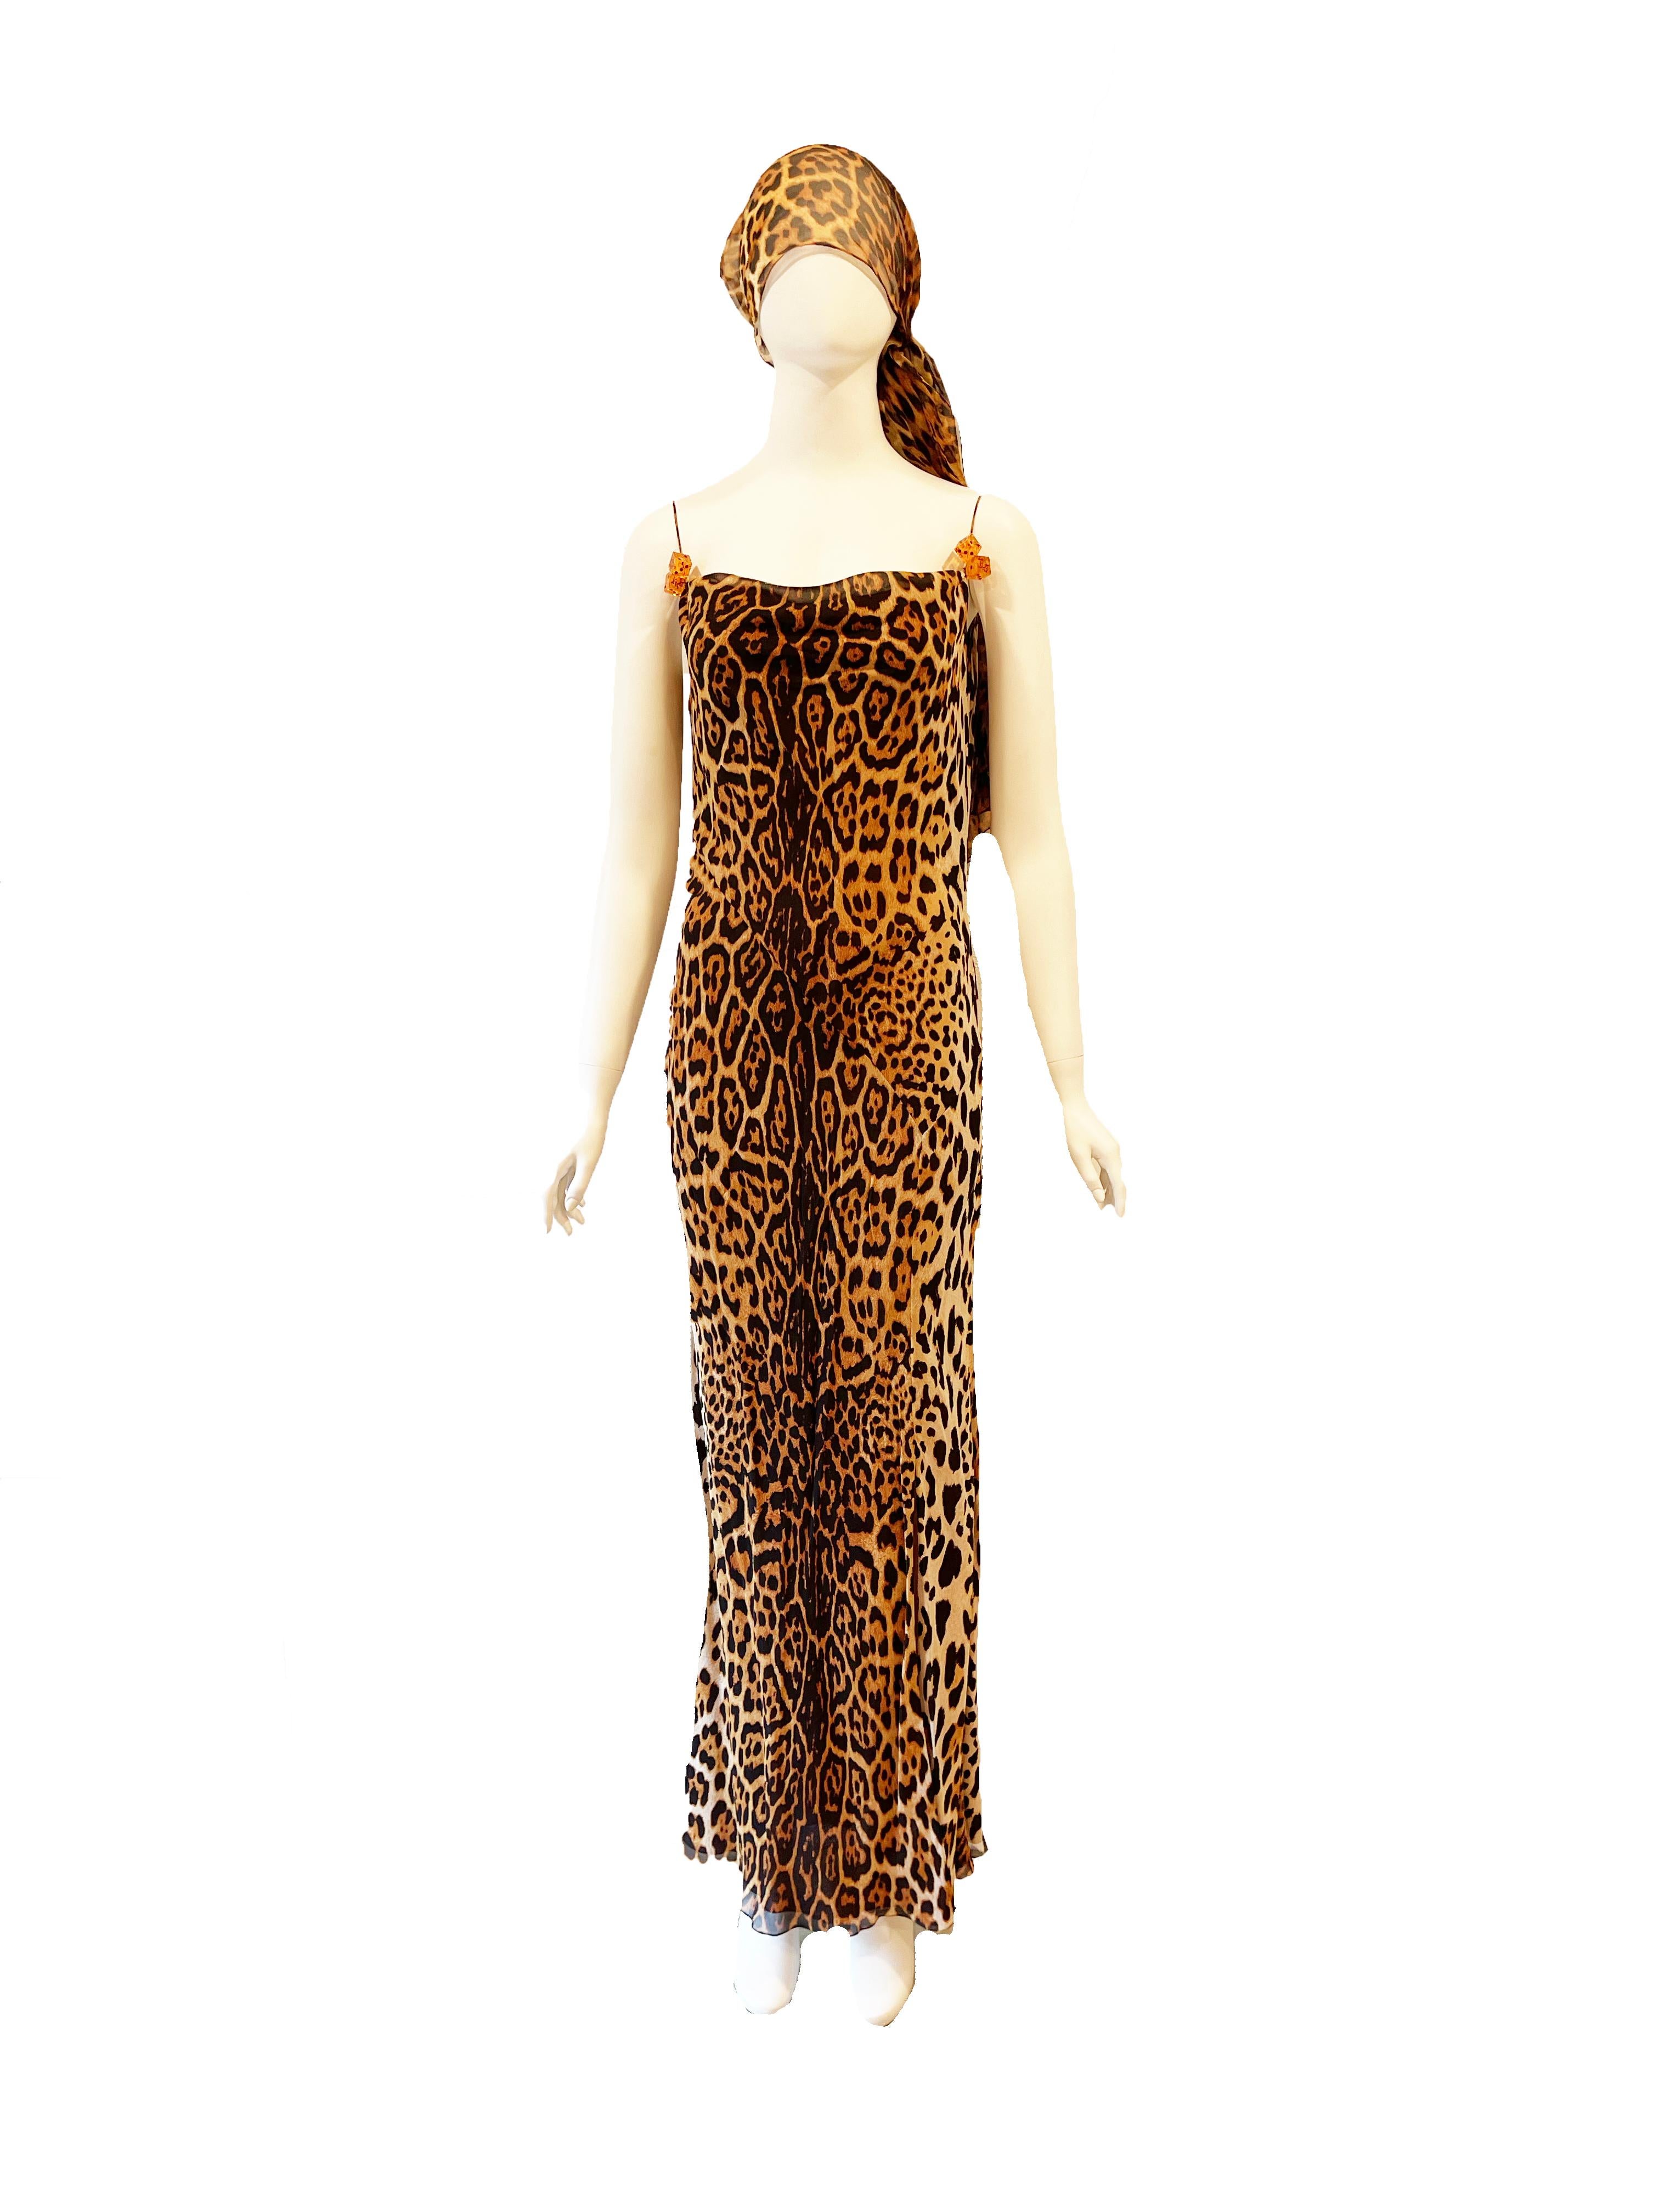 Fall / Winter 2004 CHRISTIAN DIOR by GALLIANO Gown

Leopard Print Slip dress
100% silk
Dice accents
with wrap
28